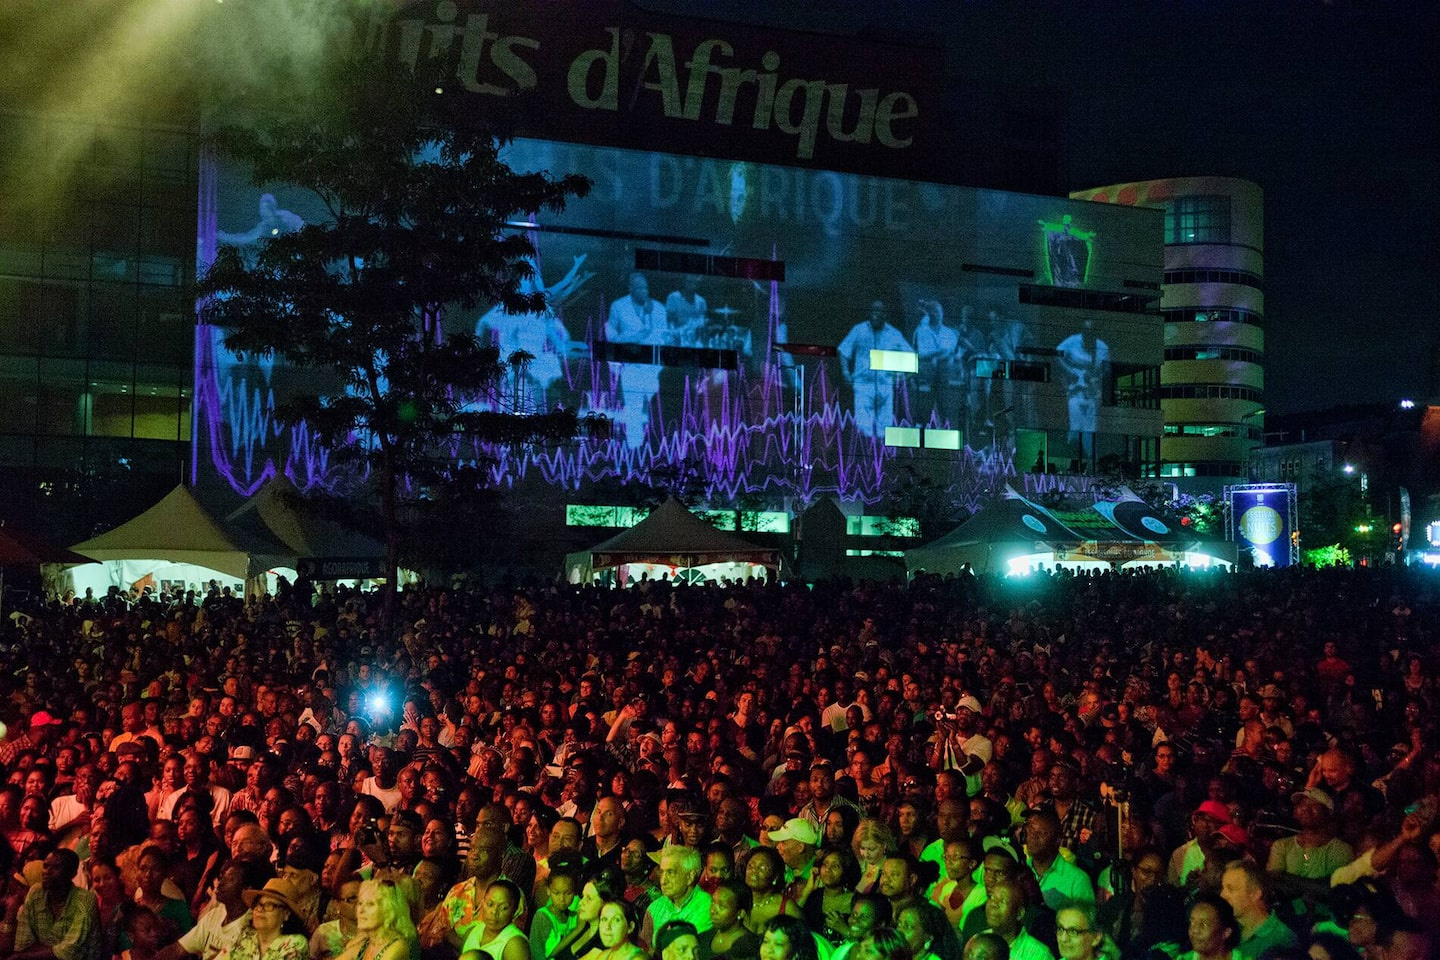 Nuits d'Afrique takes place in the city next week